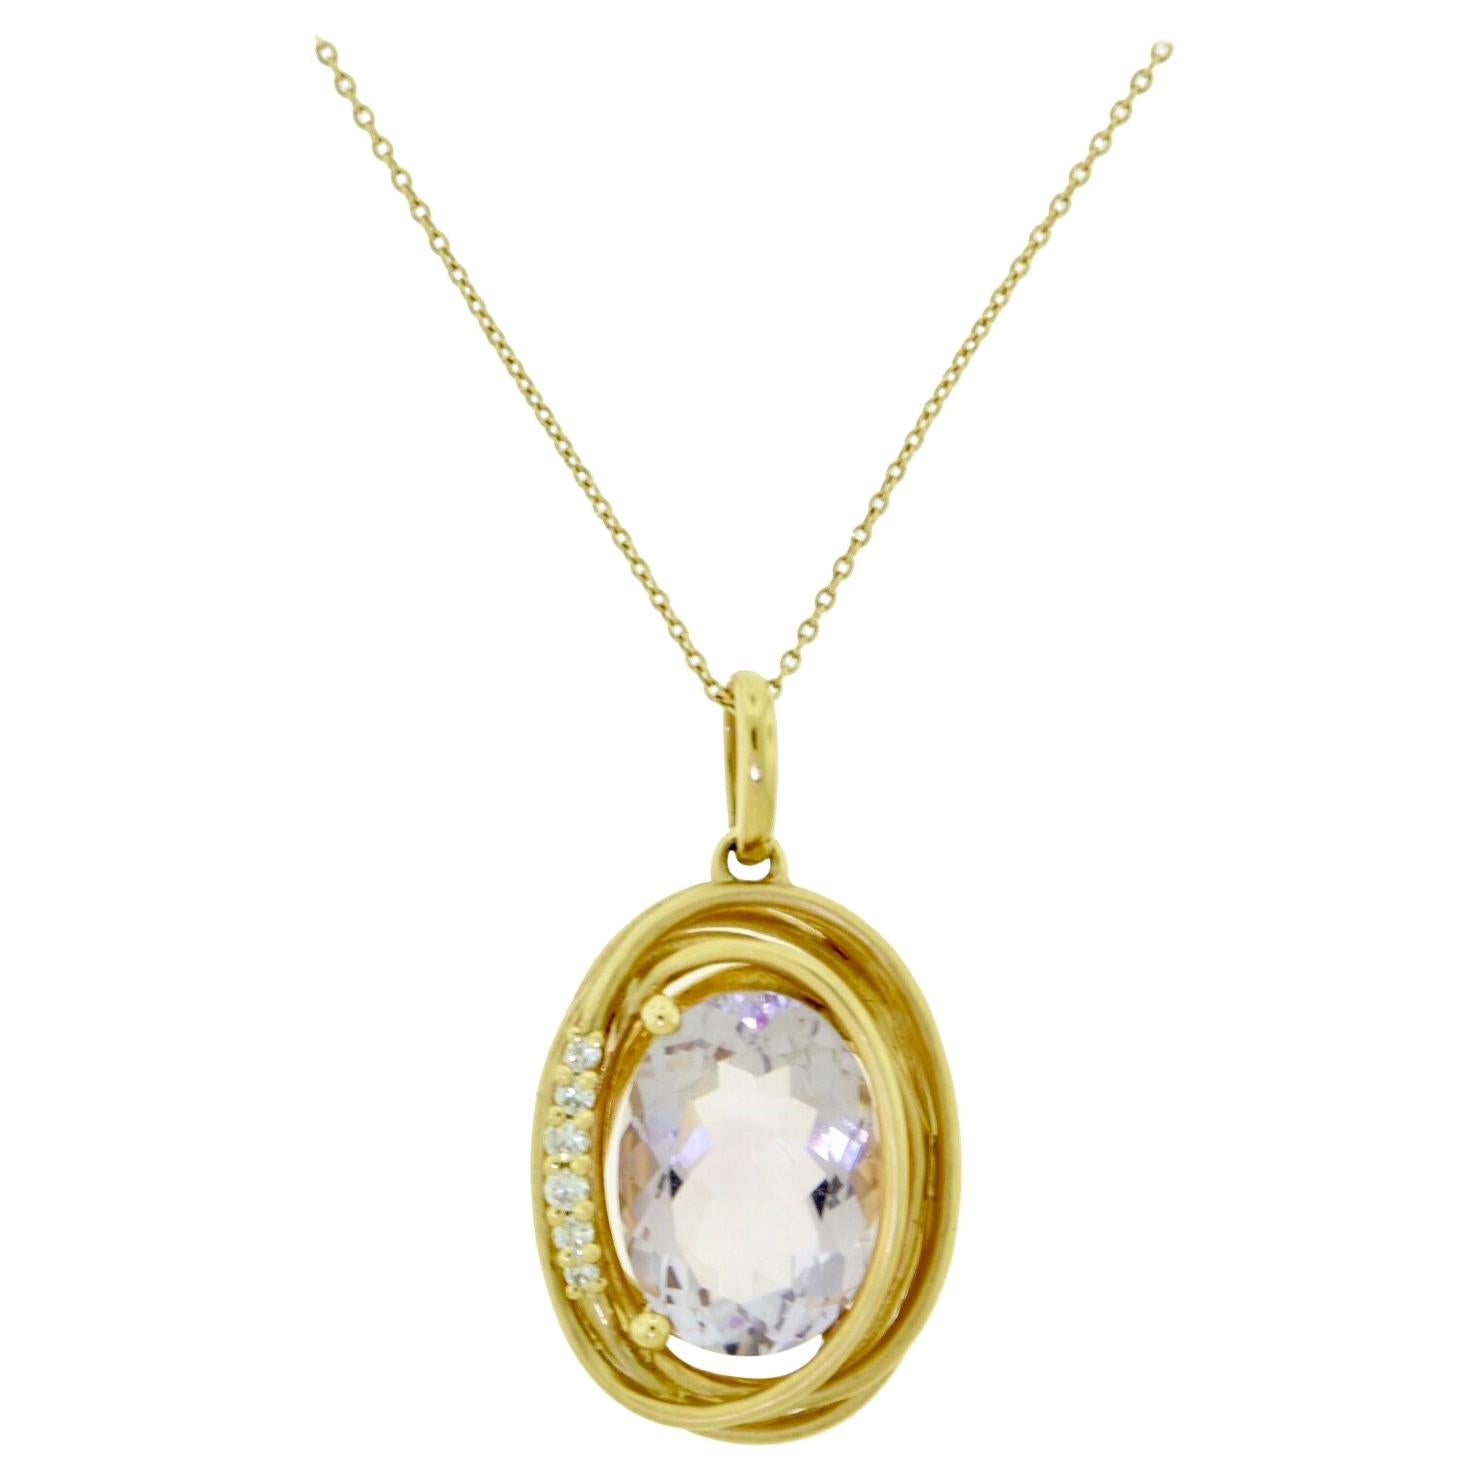 Amethyst Wrapped in Yellow Gold and Diamonds Pendant Necklace